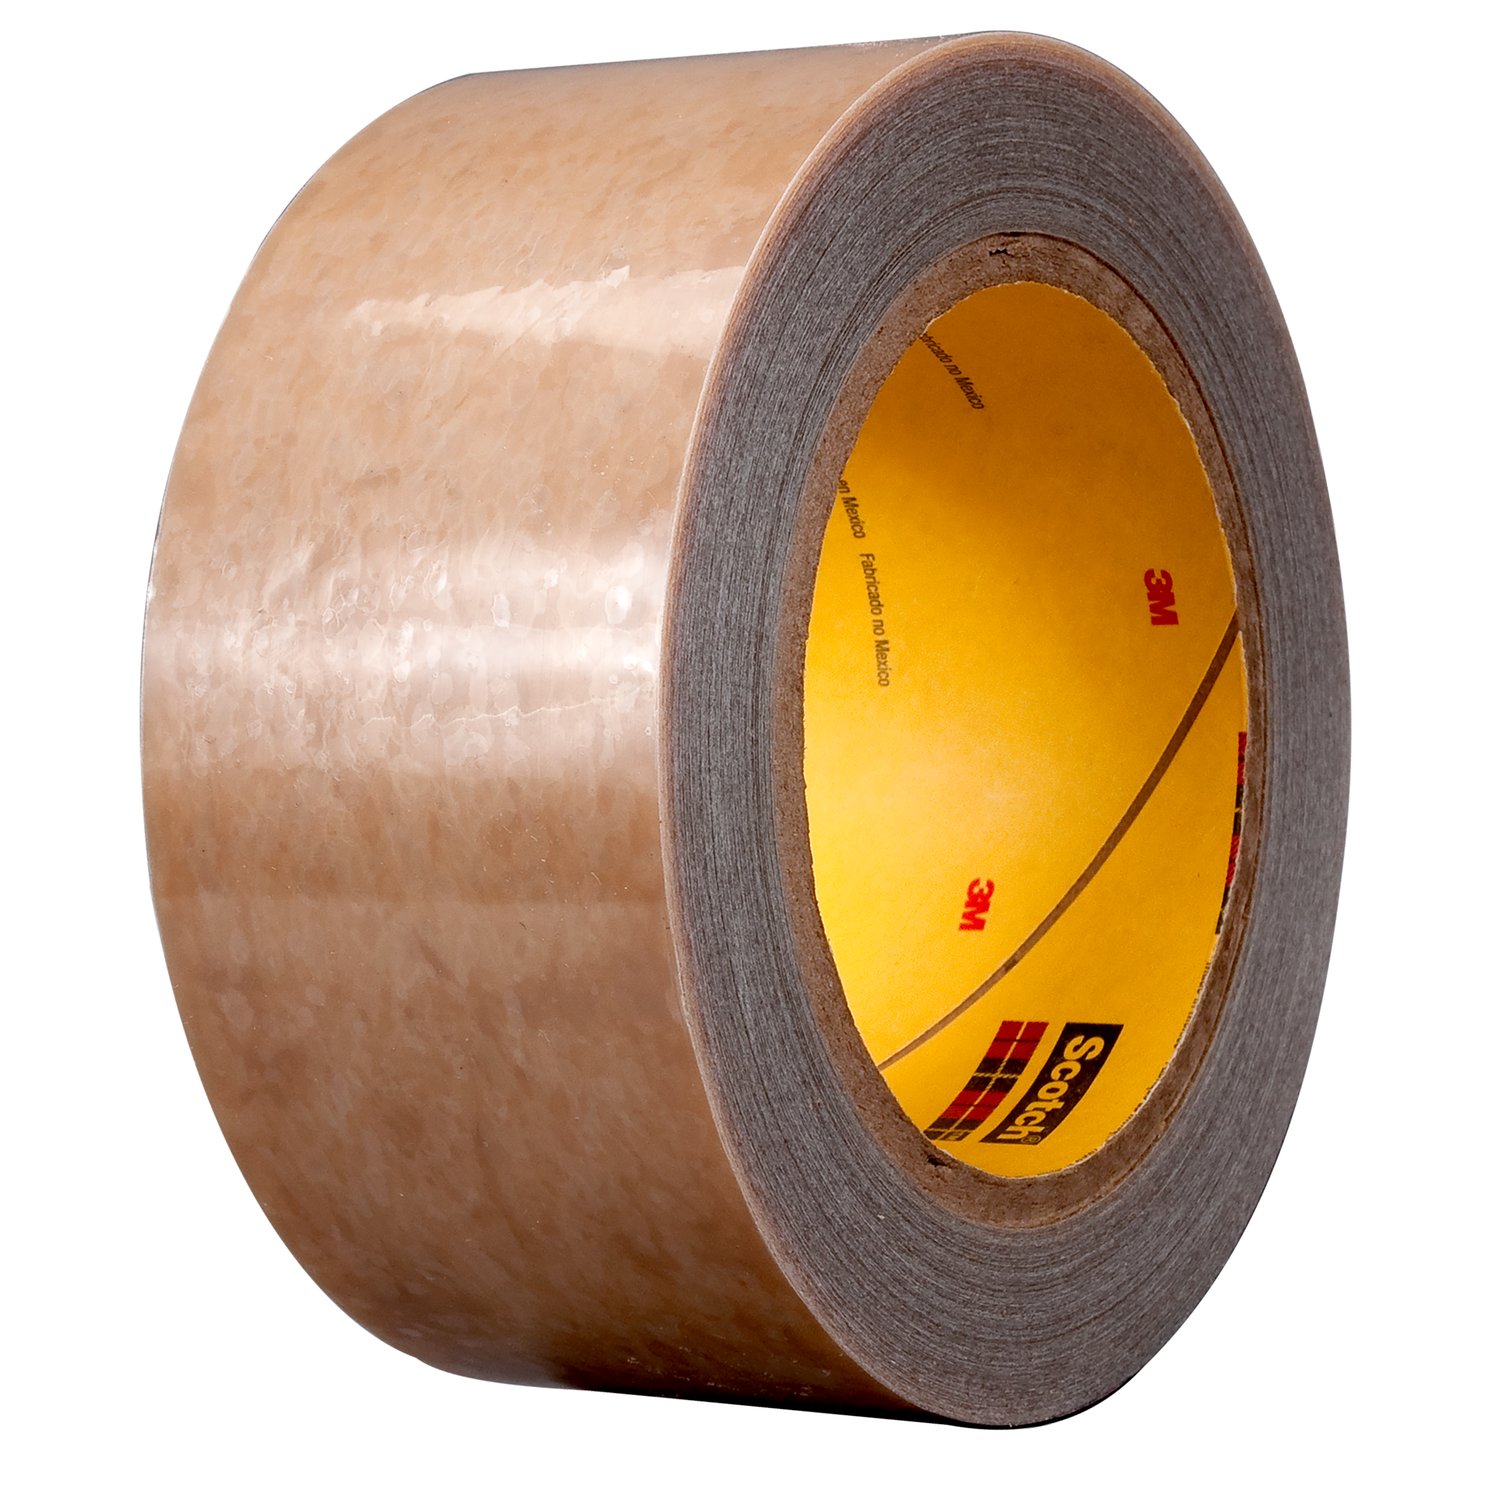 7010045101 - 3M Polyester Protective Tape 336, Transparent, 1 in x 144 yd, 1.5 mil,
9 rolls per case